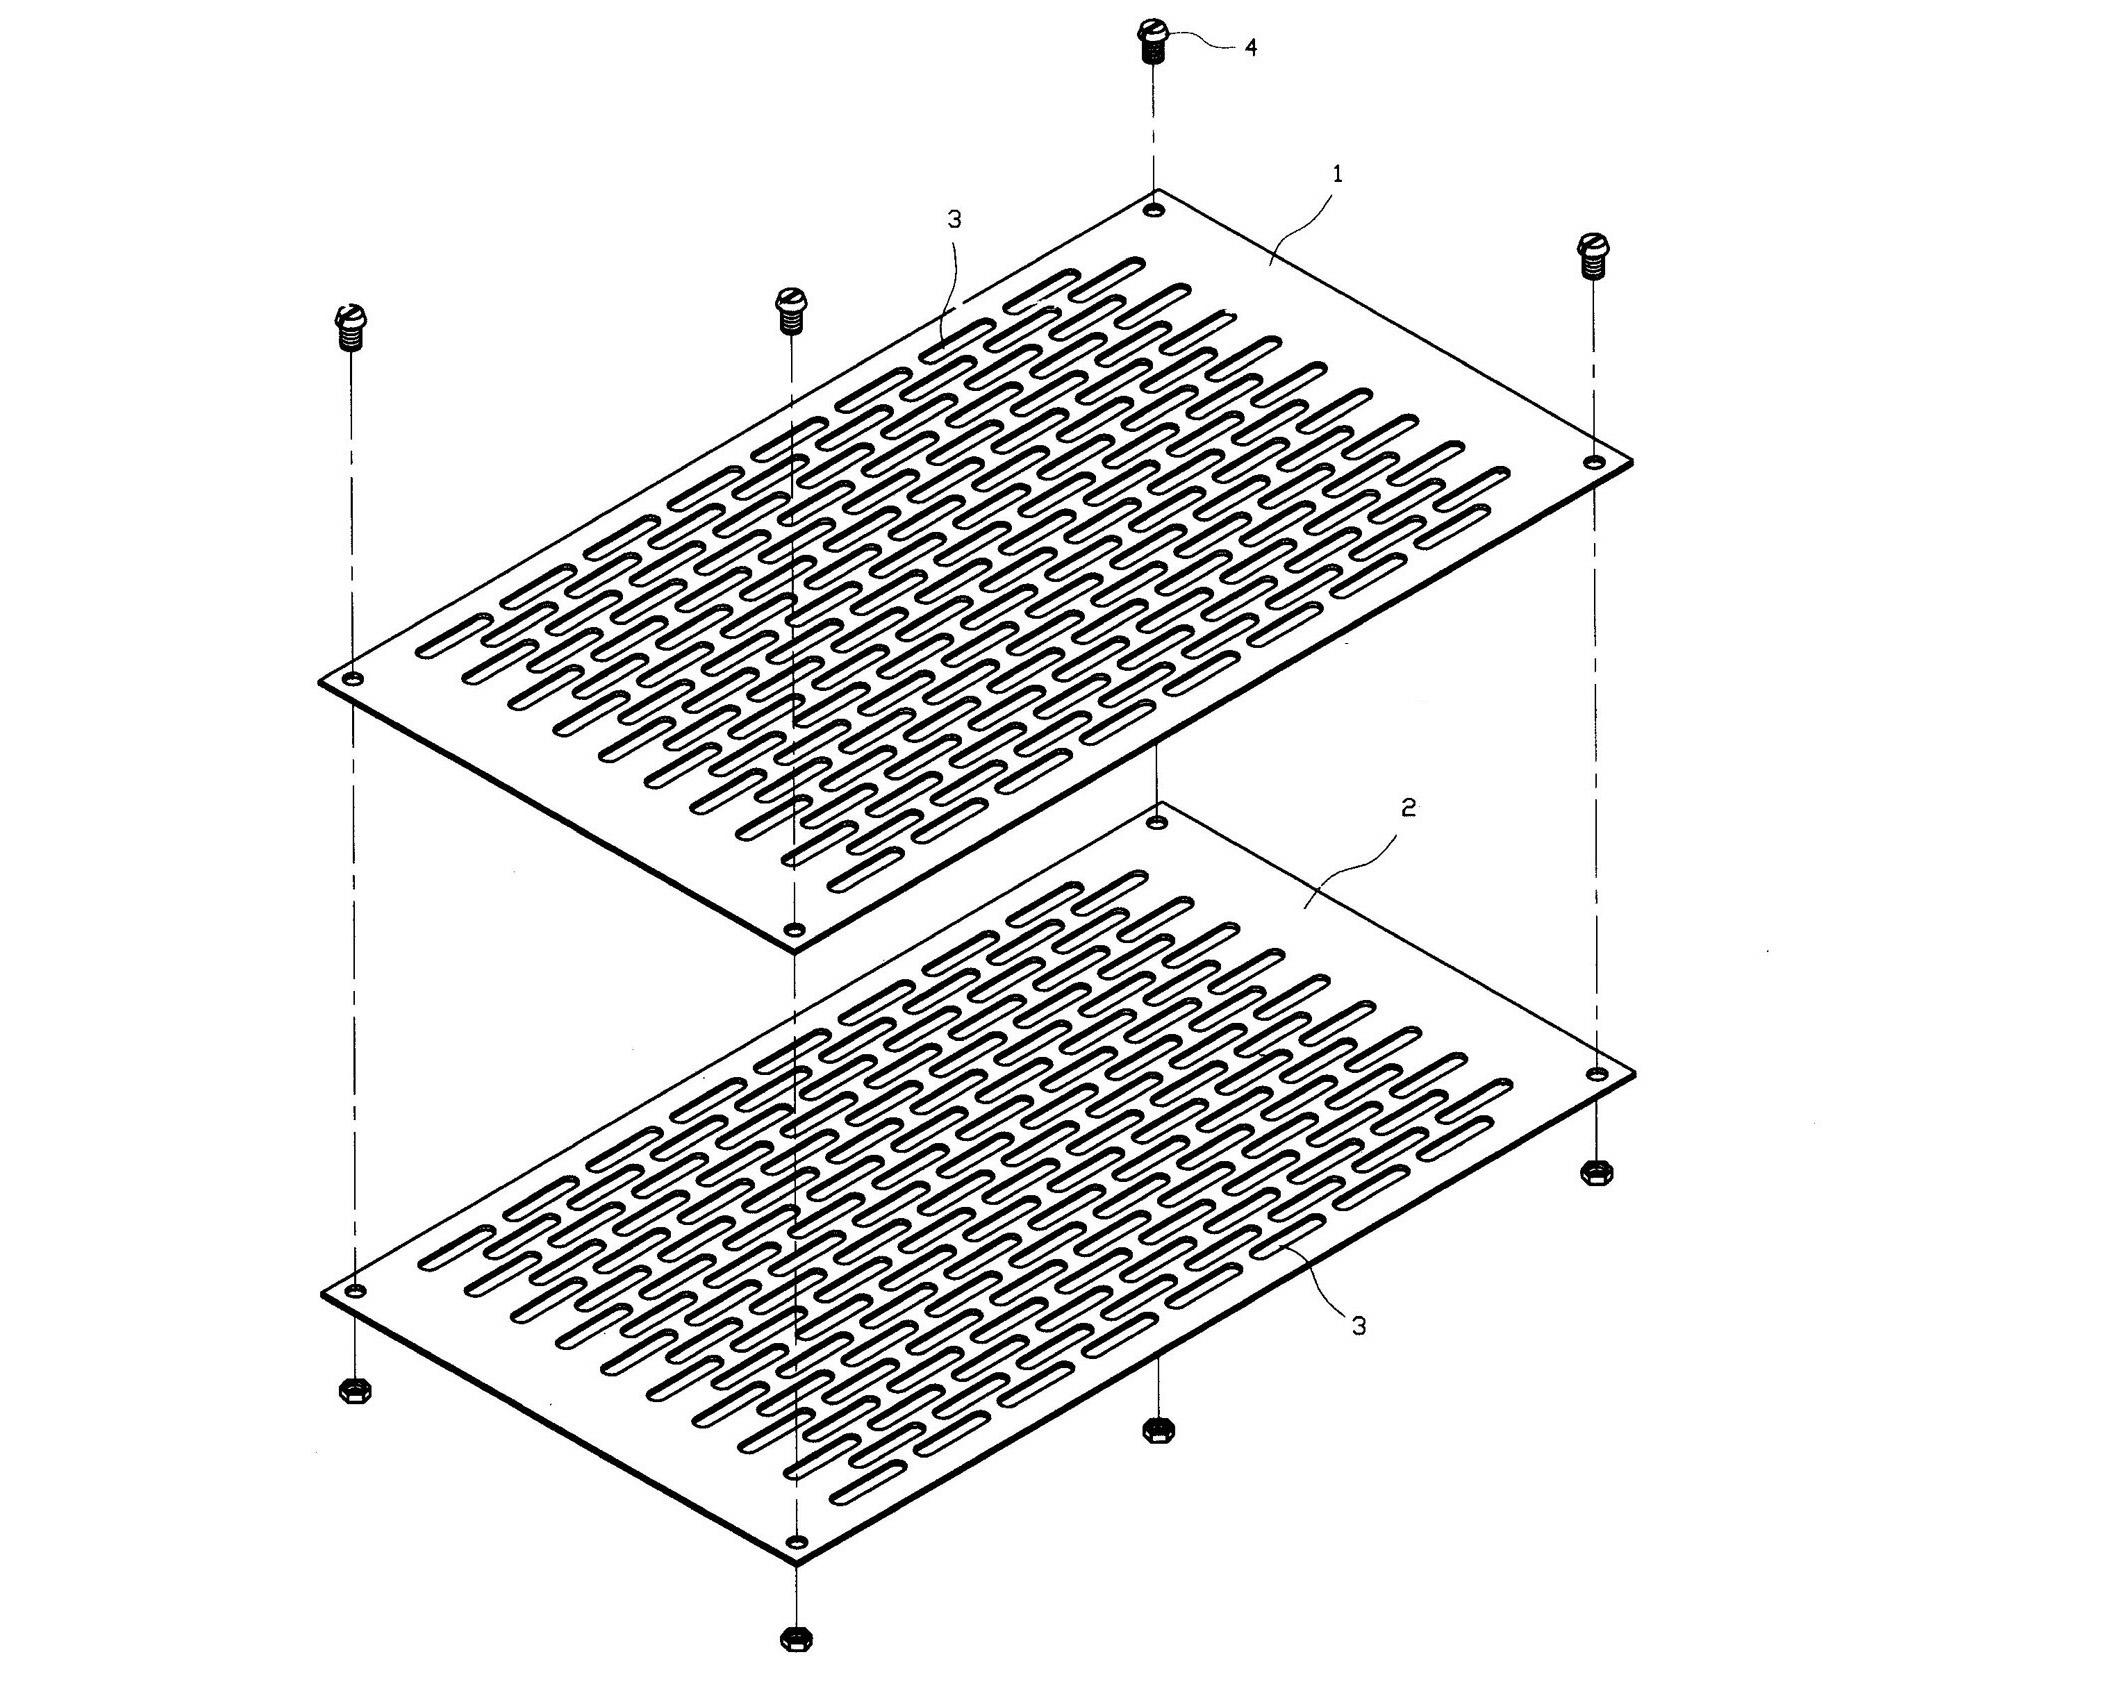 Novel screen plate with composite structure